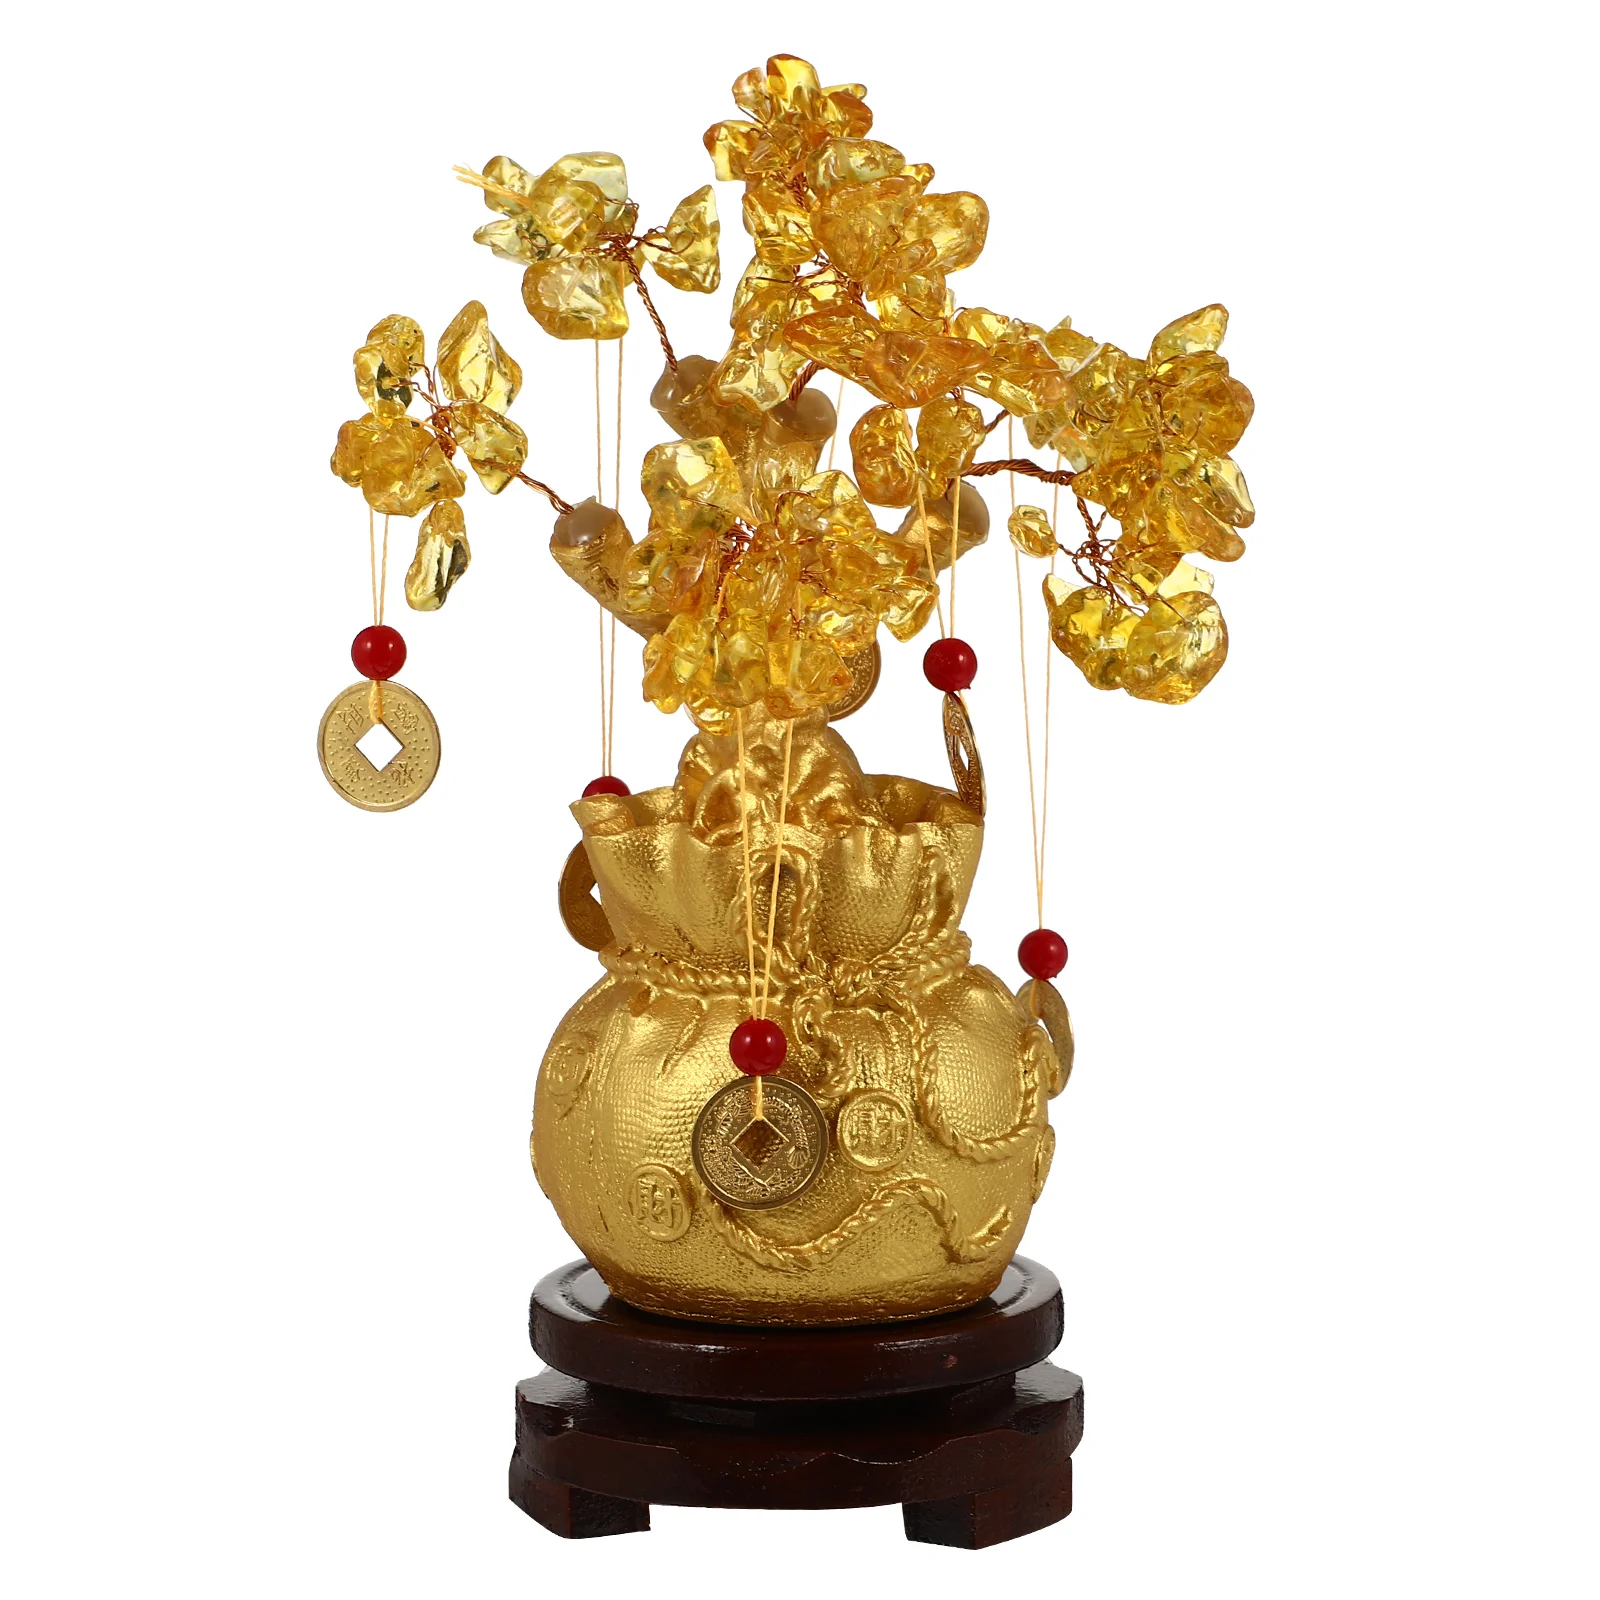 

Tree Money Shui Crystal Feng Bonsai Fortune Chinese Decoration Statue Luck Good Gemstone Citrine Figurine Ornament Wealth Lucky